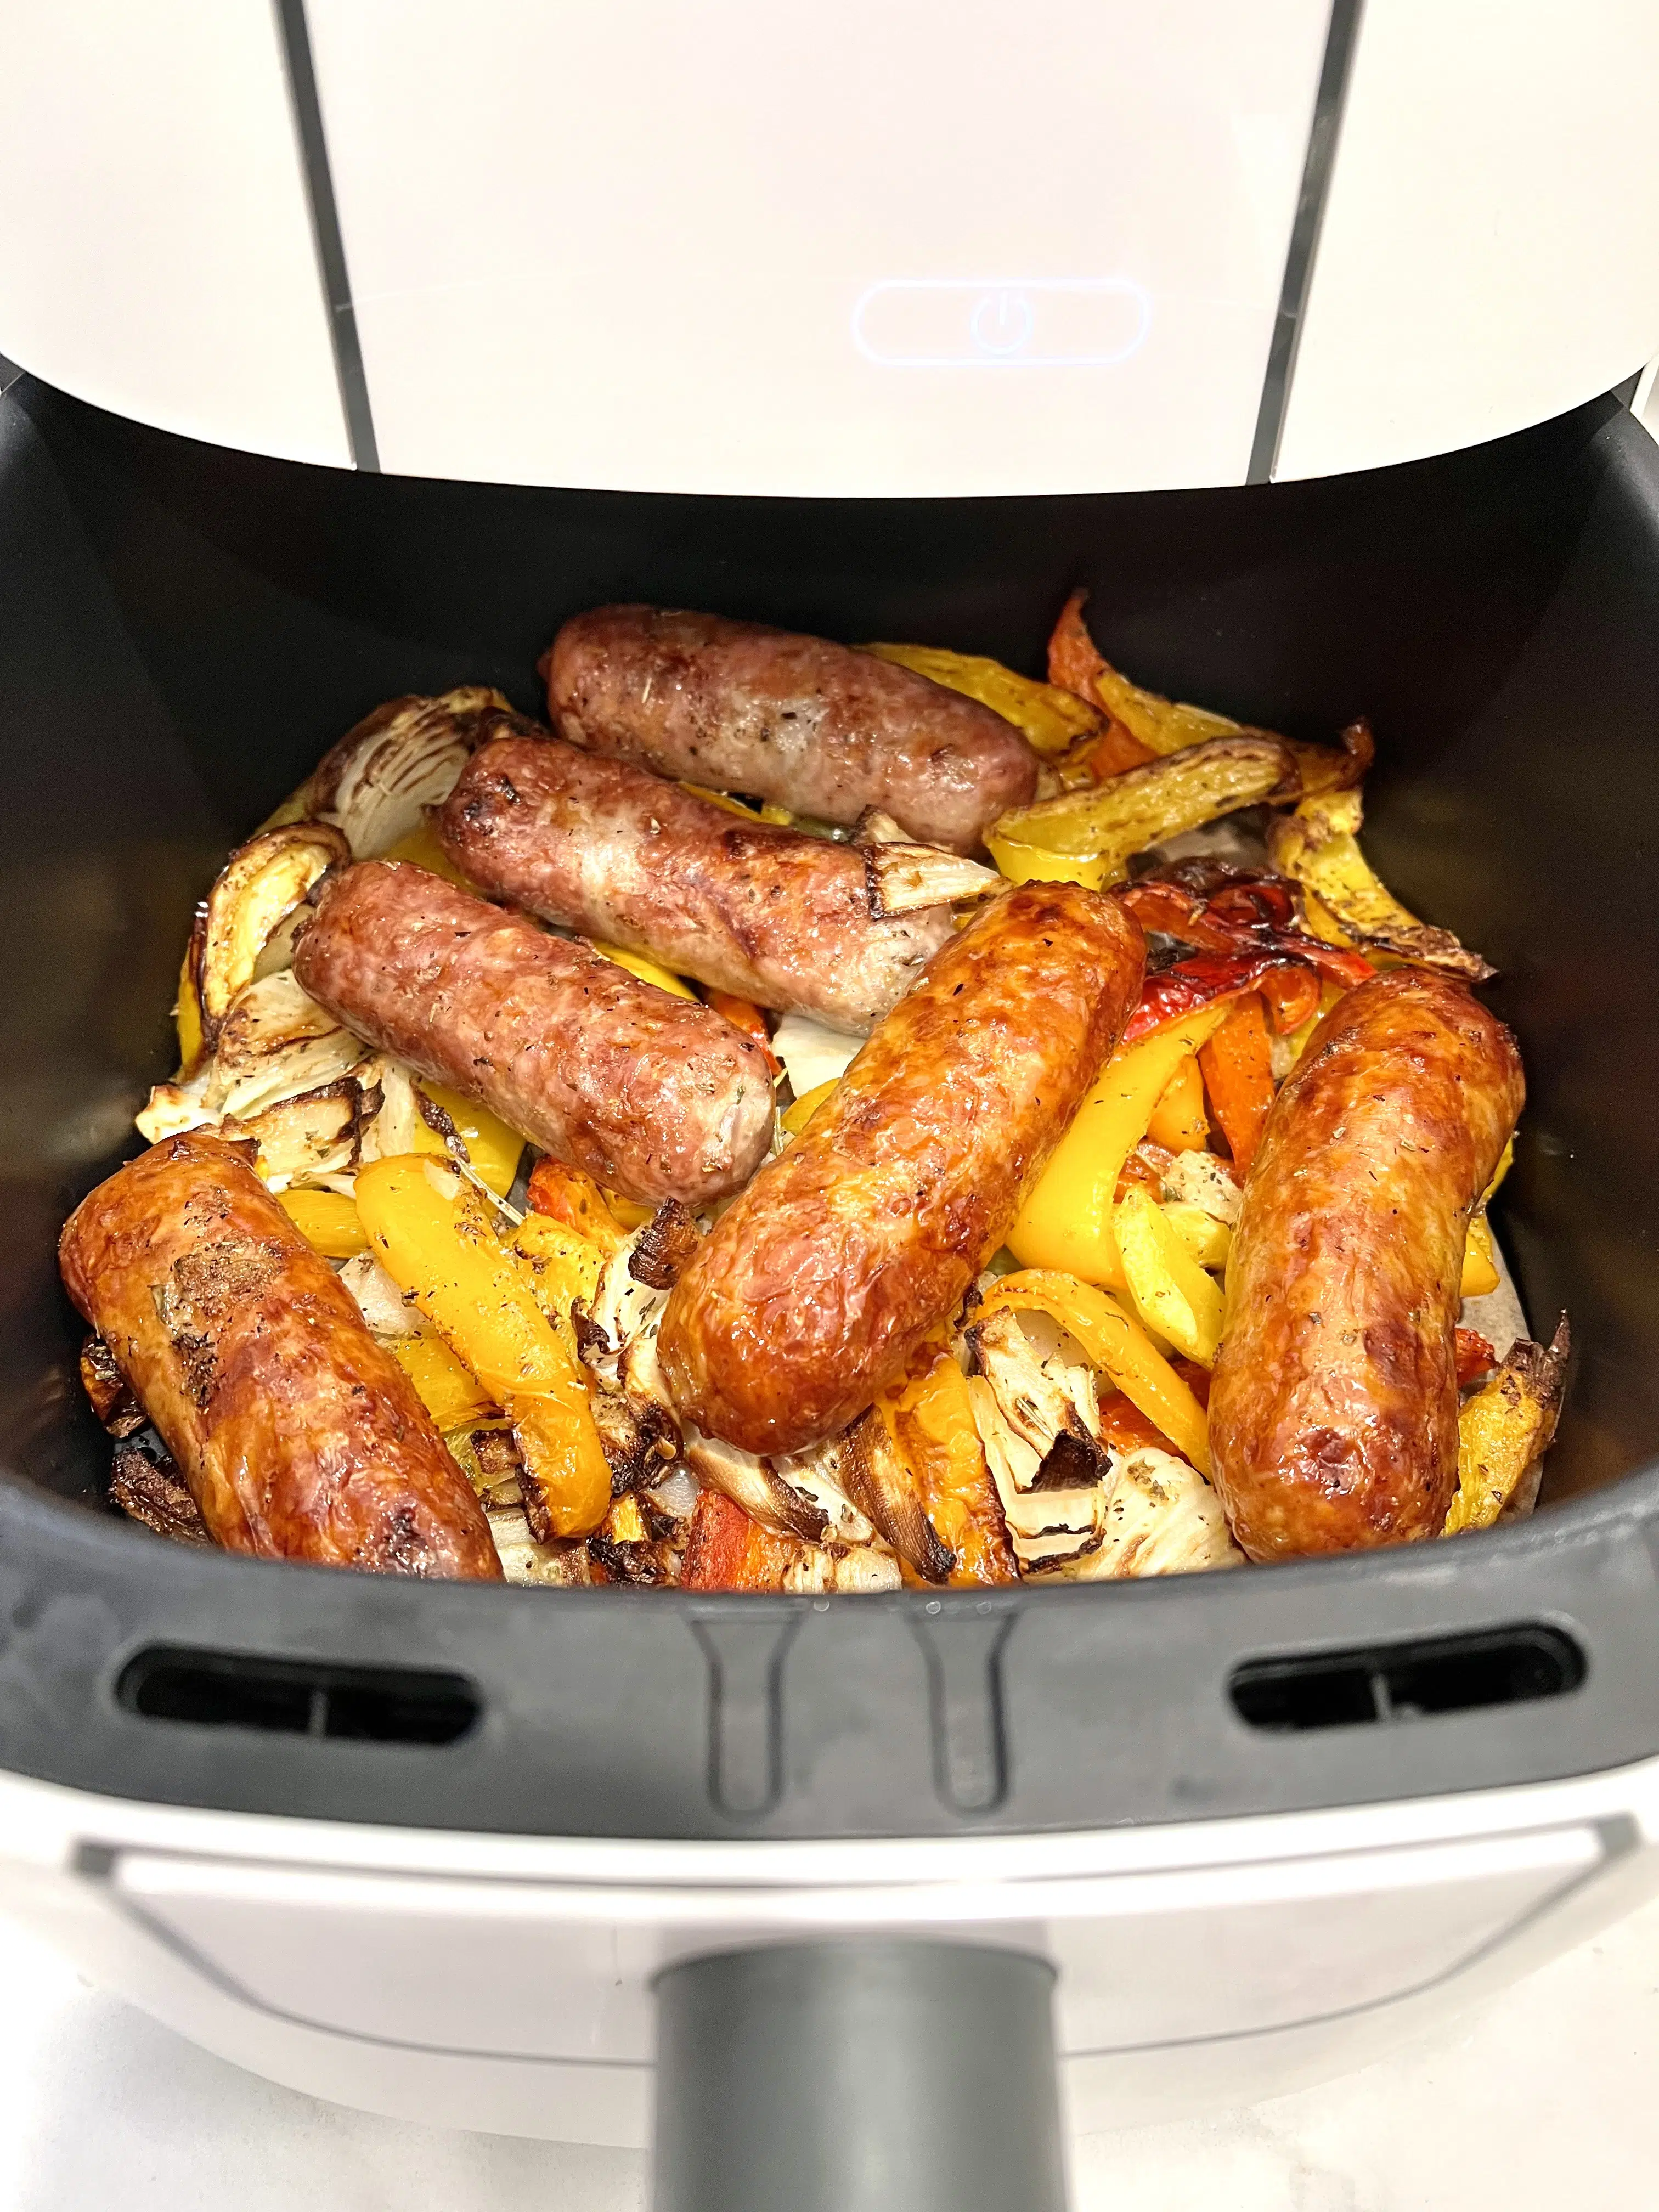 cooked sausages and peppers in the air fryer